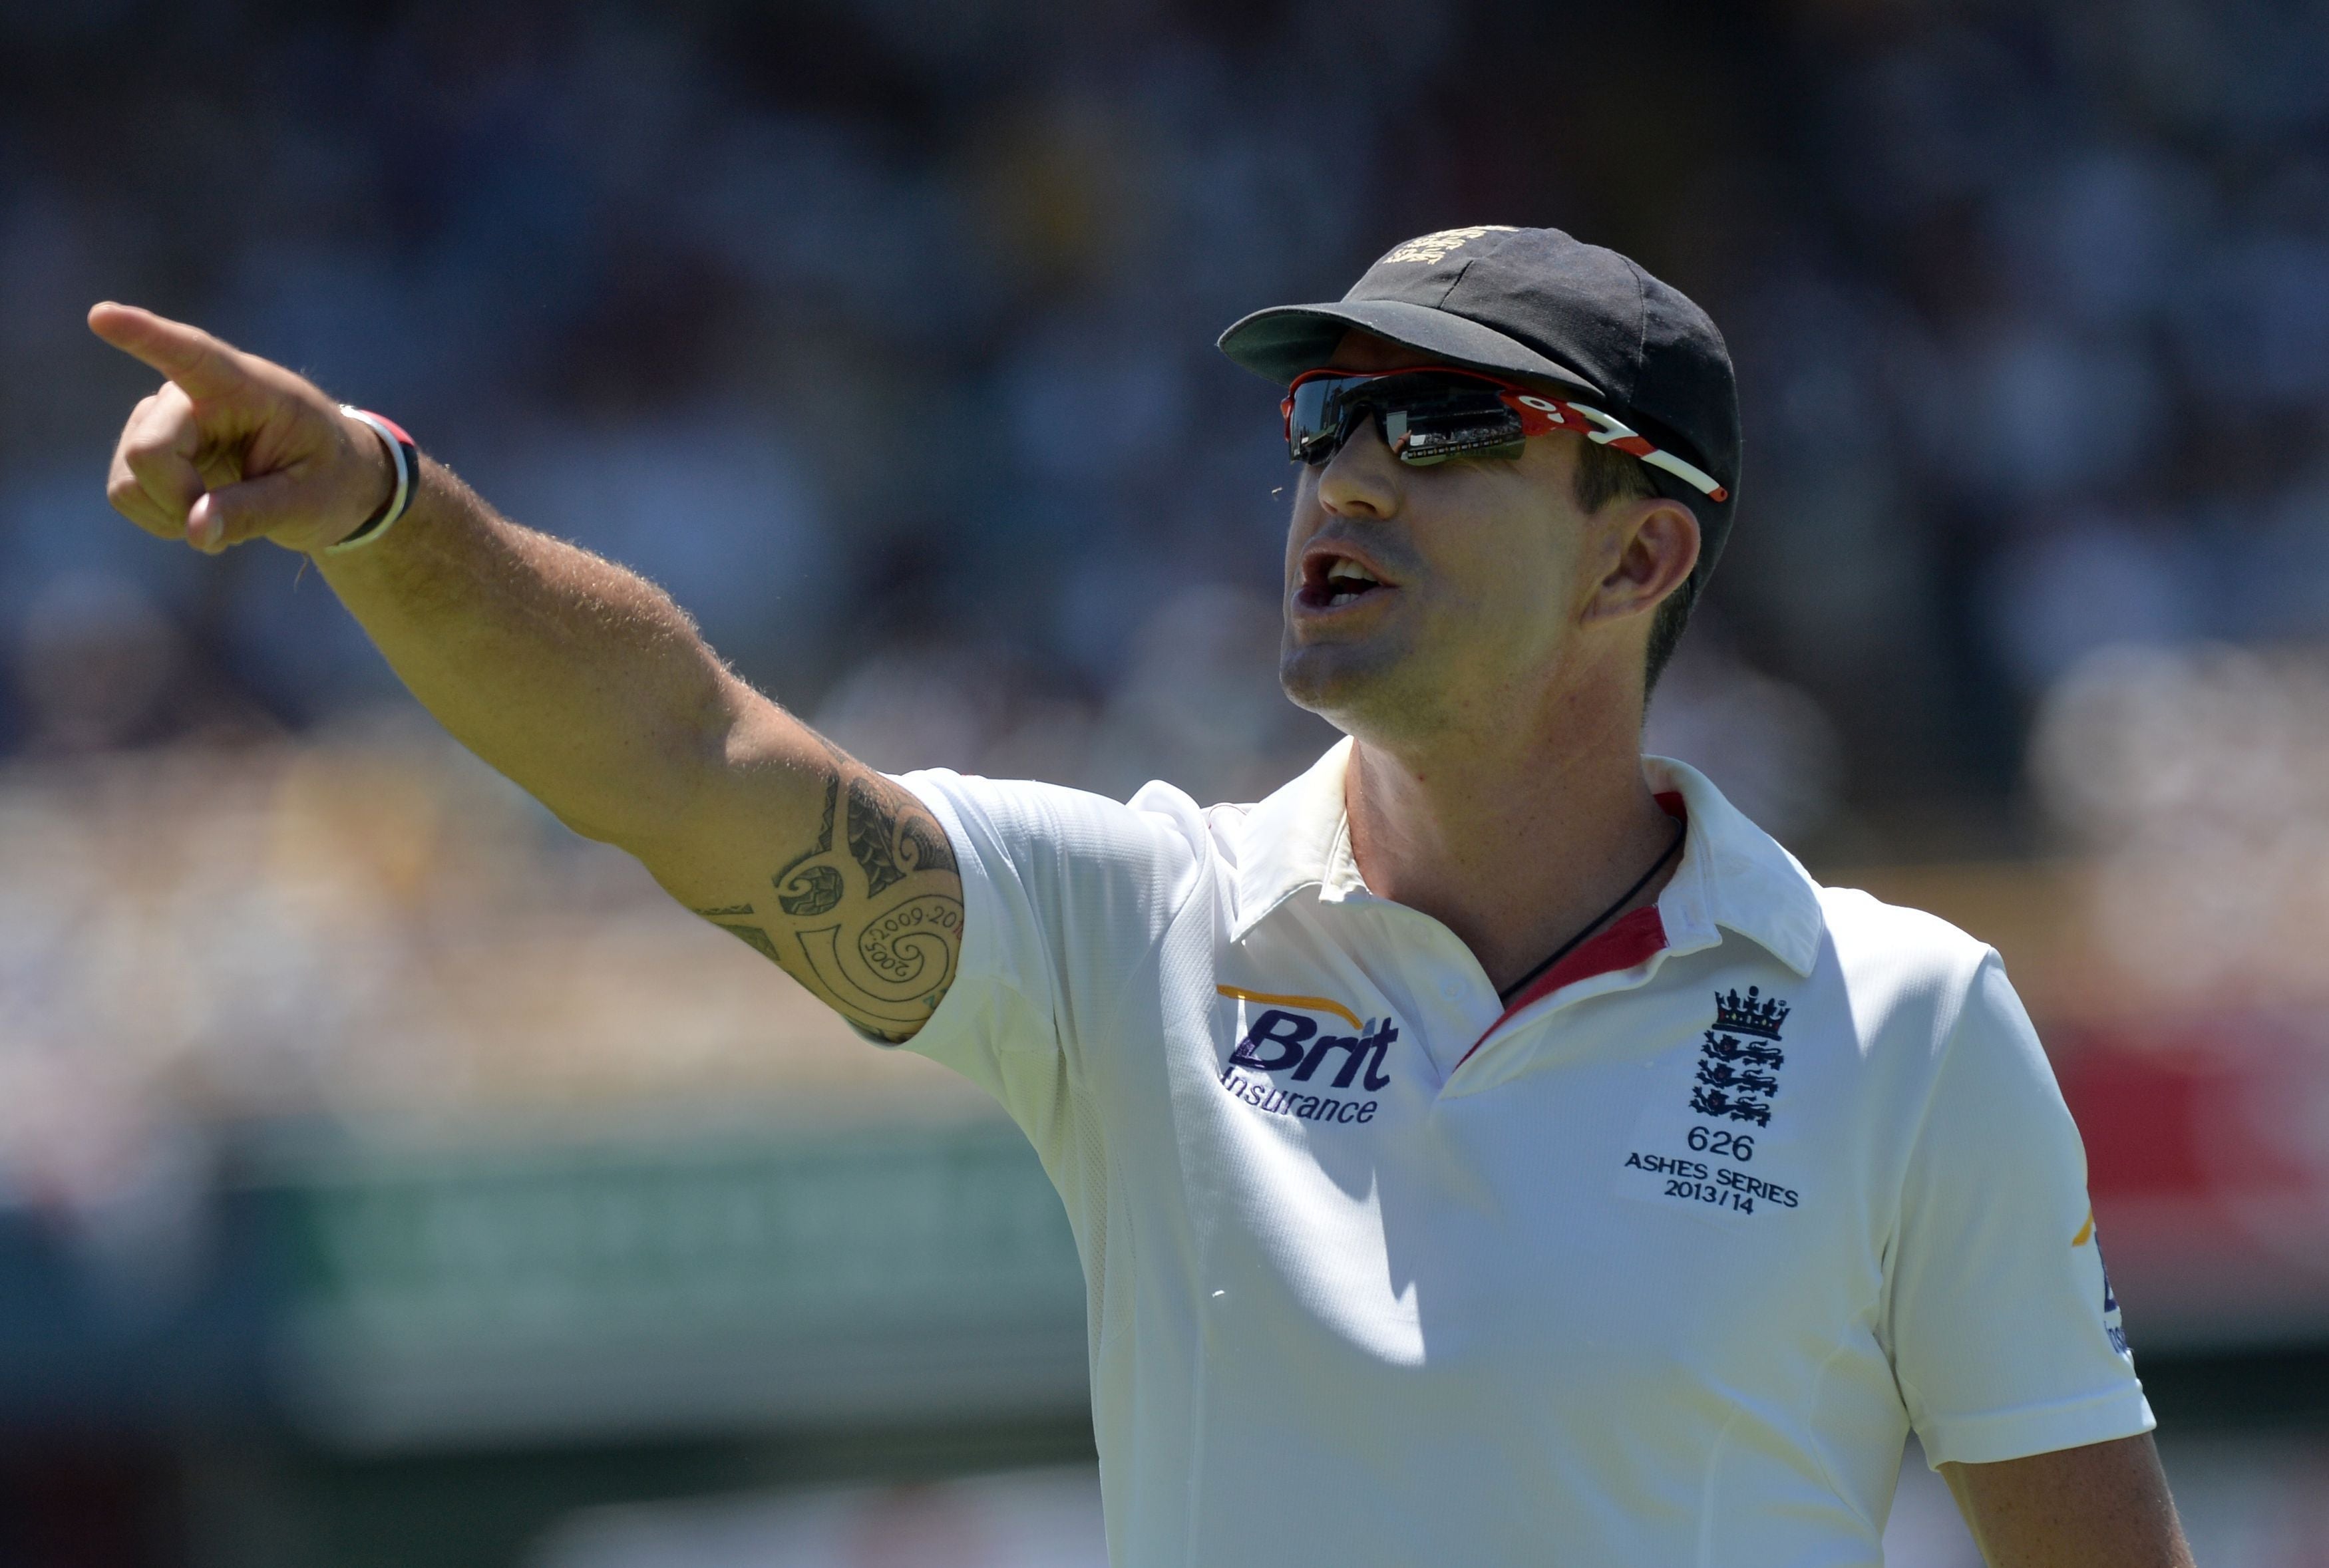 Kevin Pietersen had been dropped by England for sending “provocative” text messages to South Africa players (Anthony Devlin/PA)